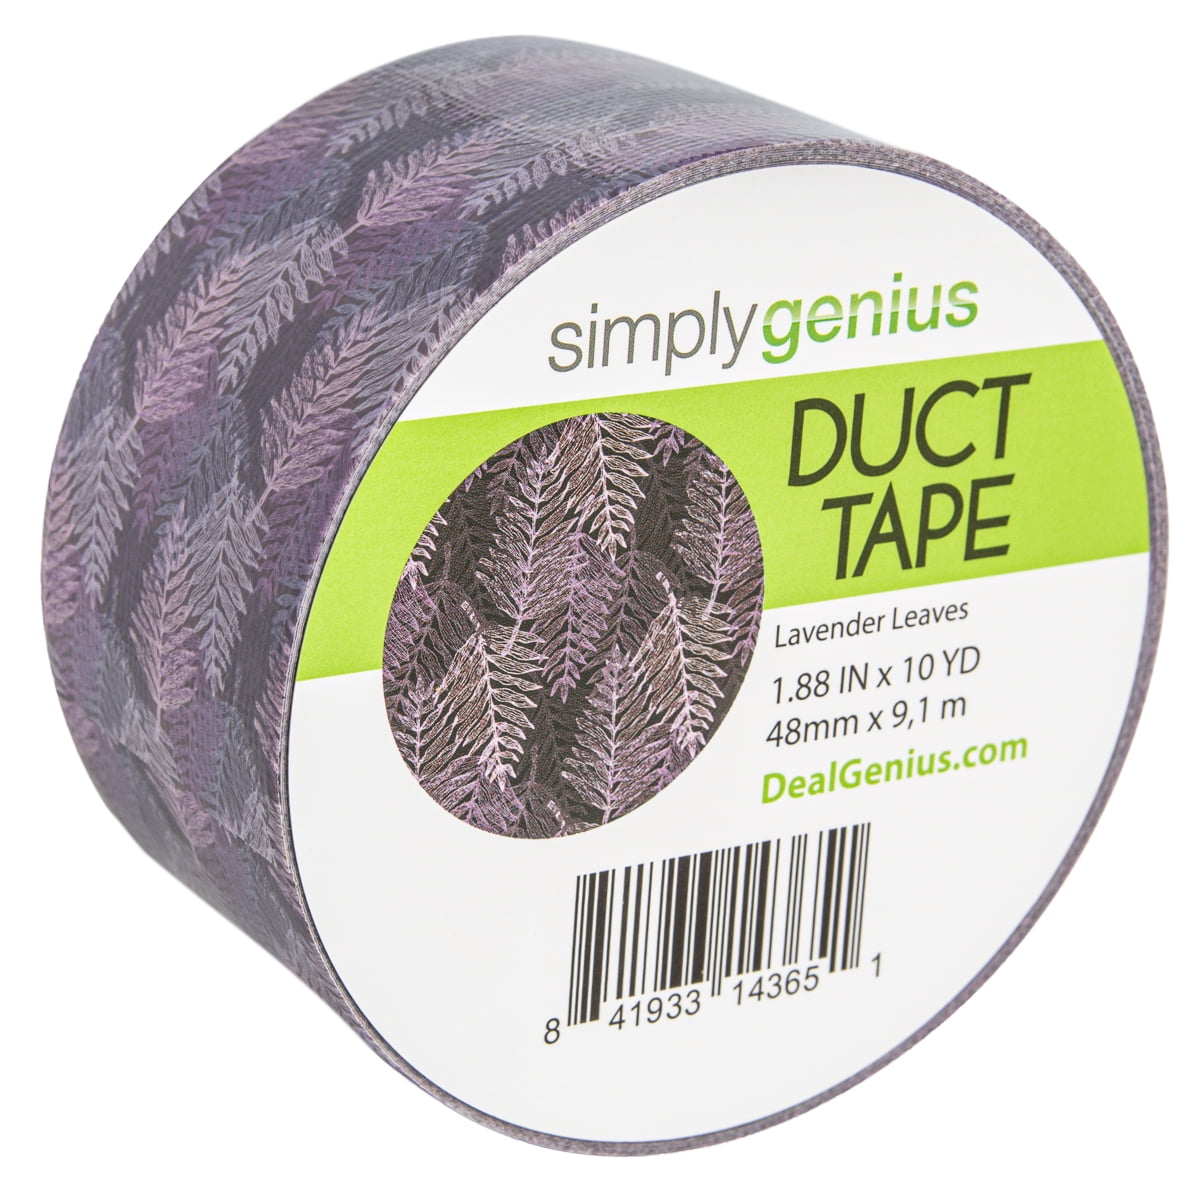 Simply Genius Craft Duct Tape Roll with Colors and Patterns, Solid